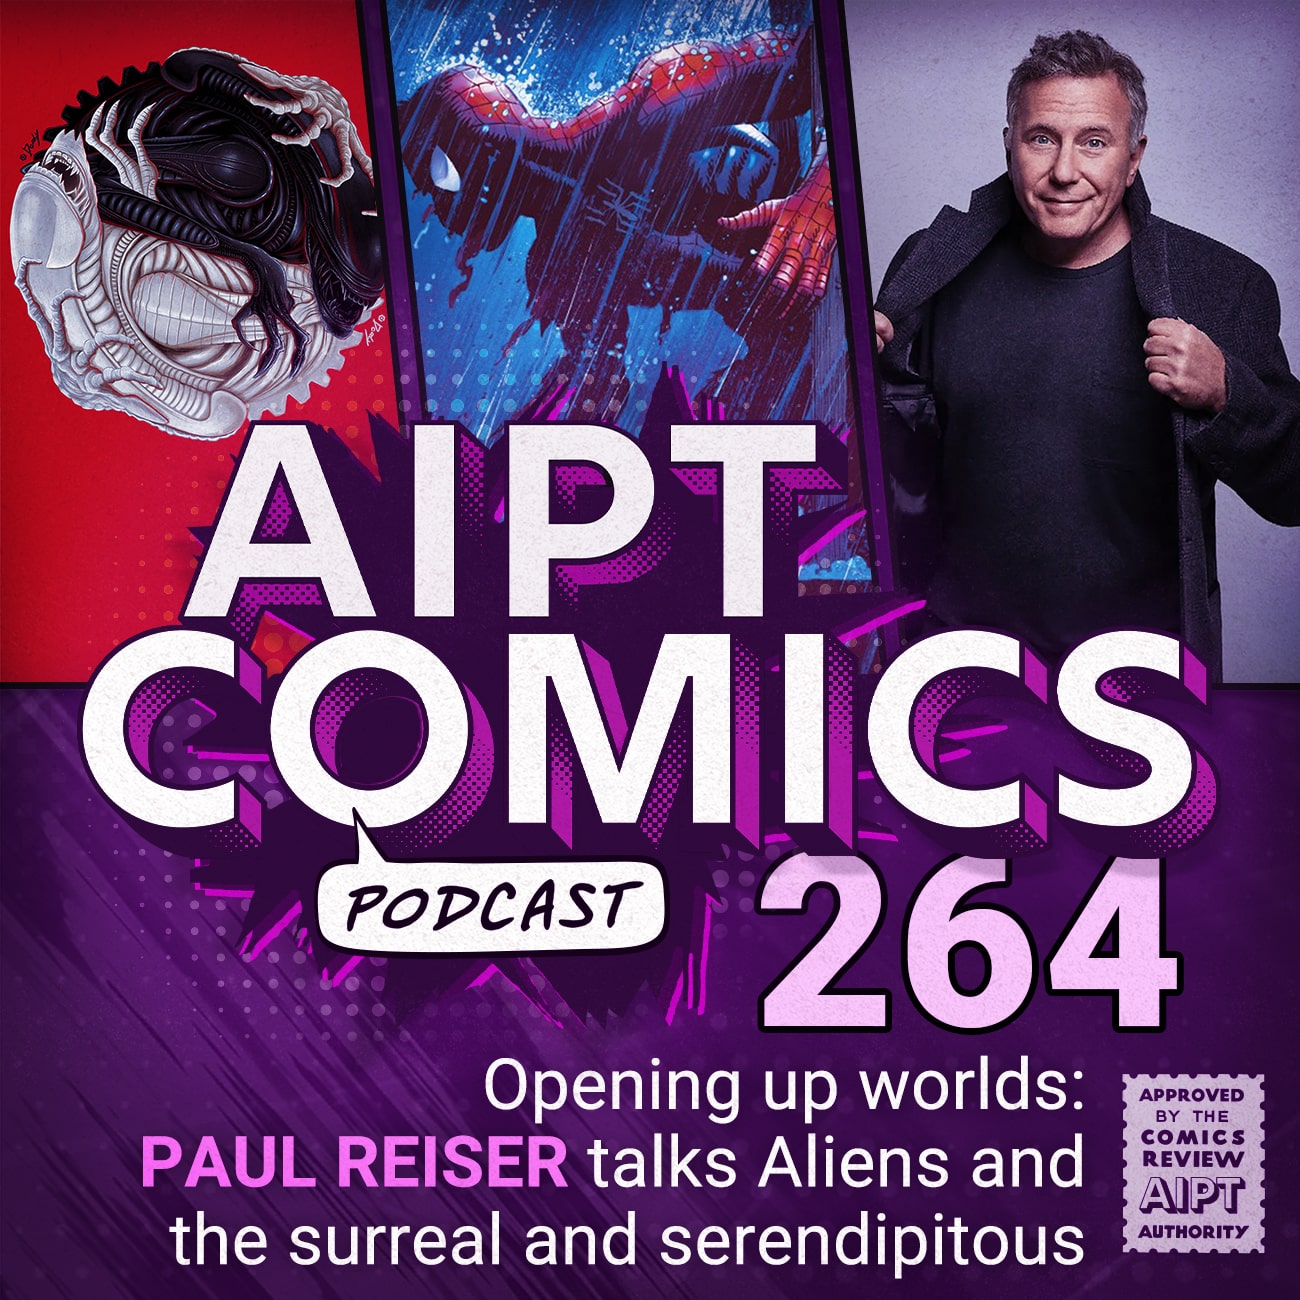 AIPT Comics Podcast Episode 264: Opening up worlds: Paul Reiser on ‘Aliens: What If…?’ and the surreal and serendipitous